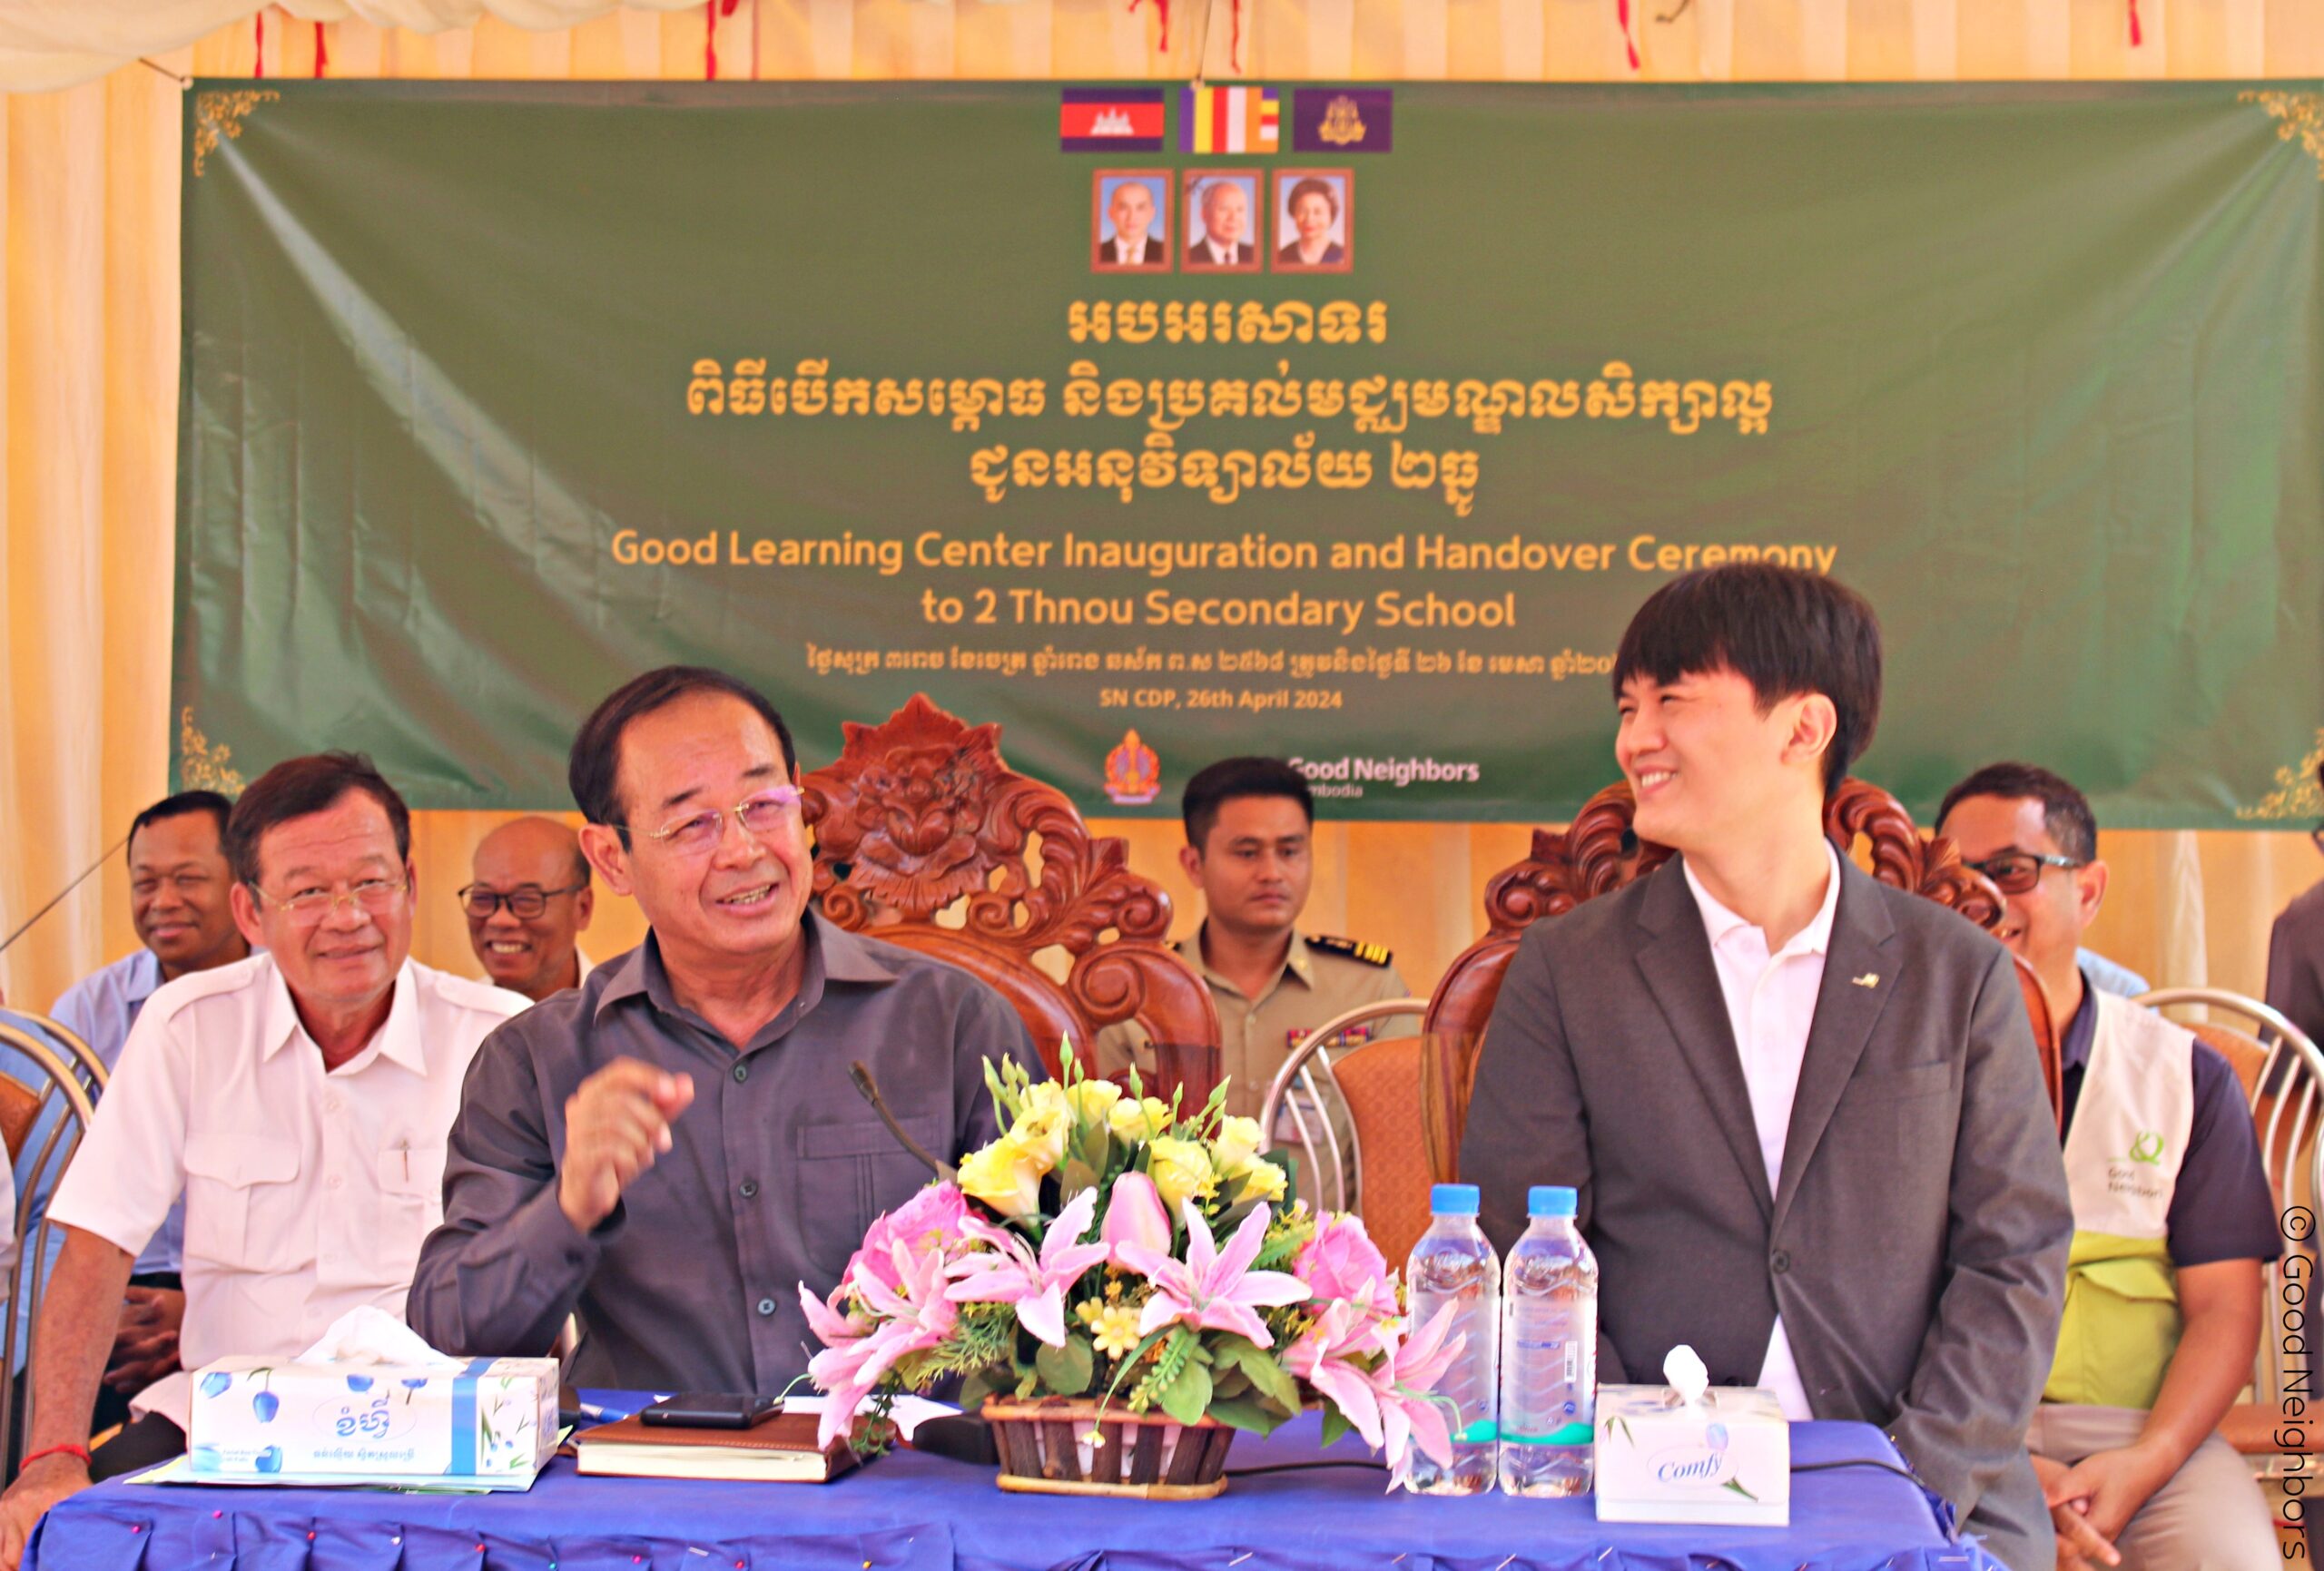 Good Neighbors Cambodia Handovers Good Learning Center to 2 Thnou Secondary School in Kratie Province